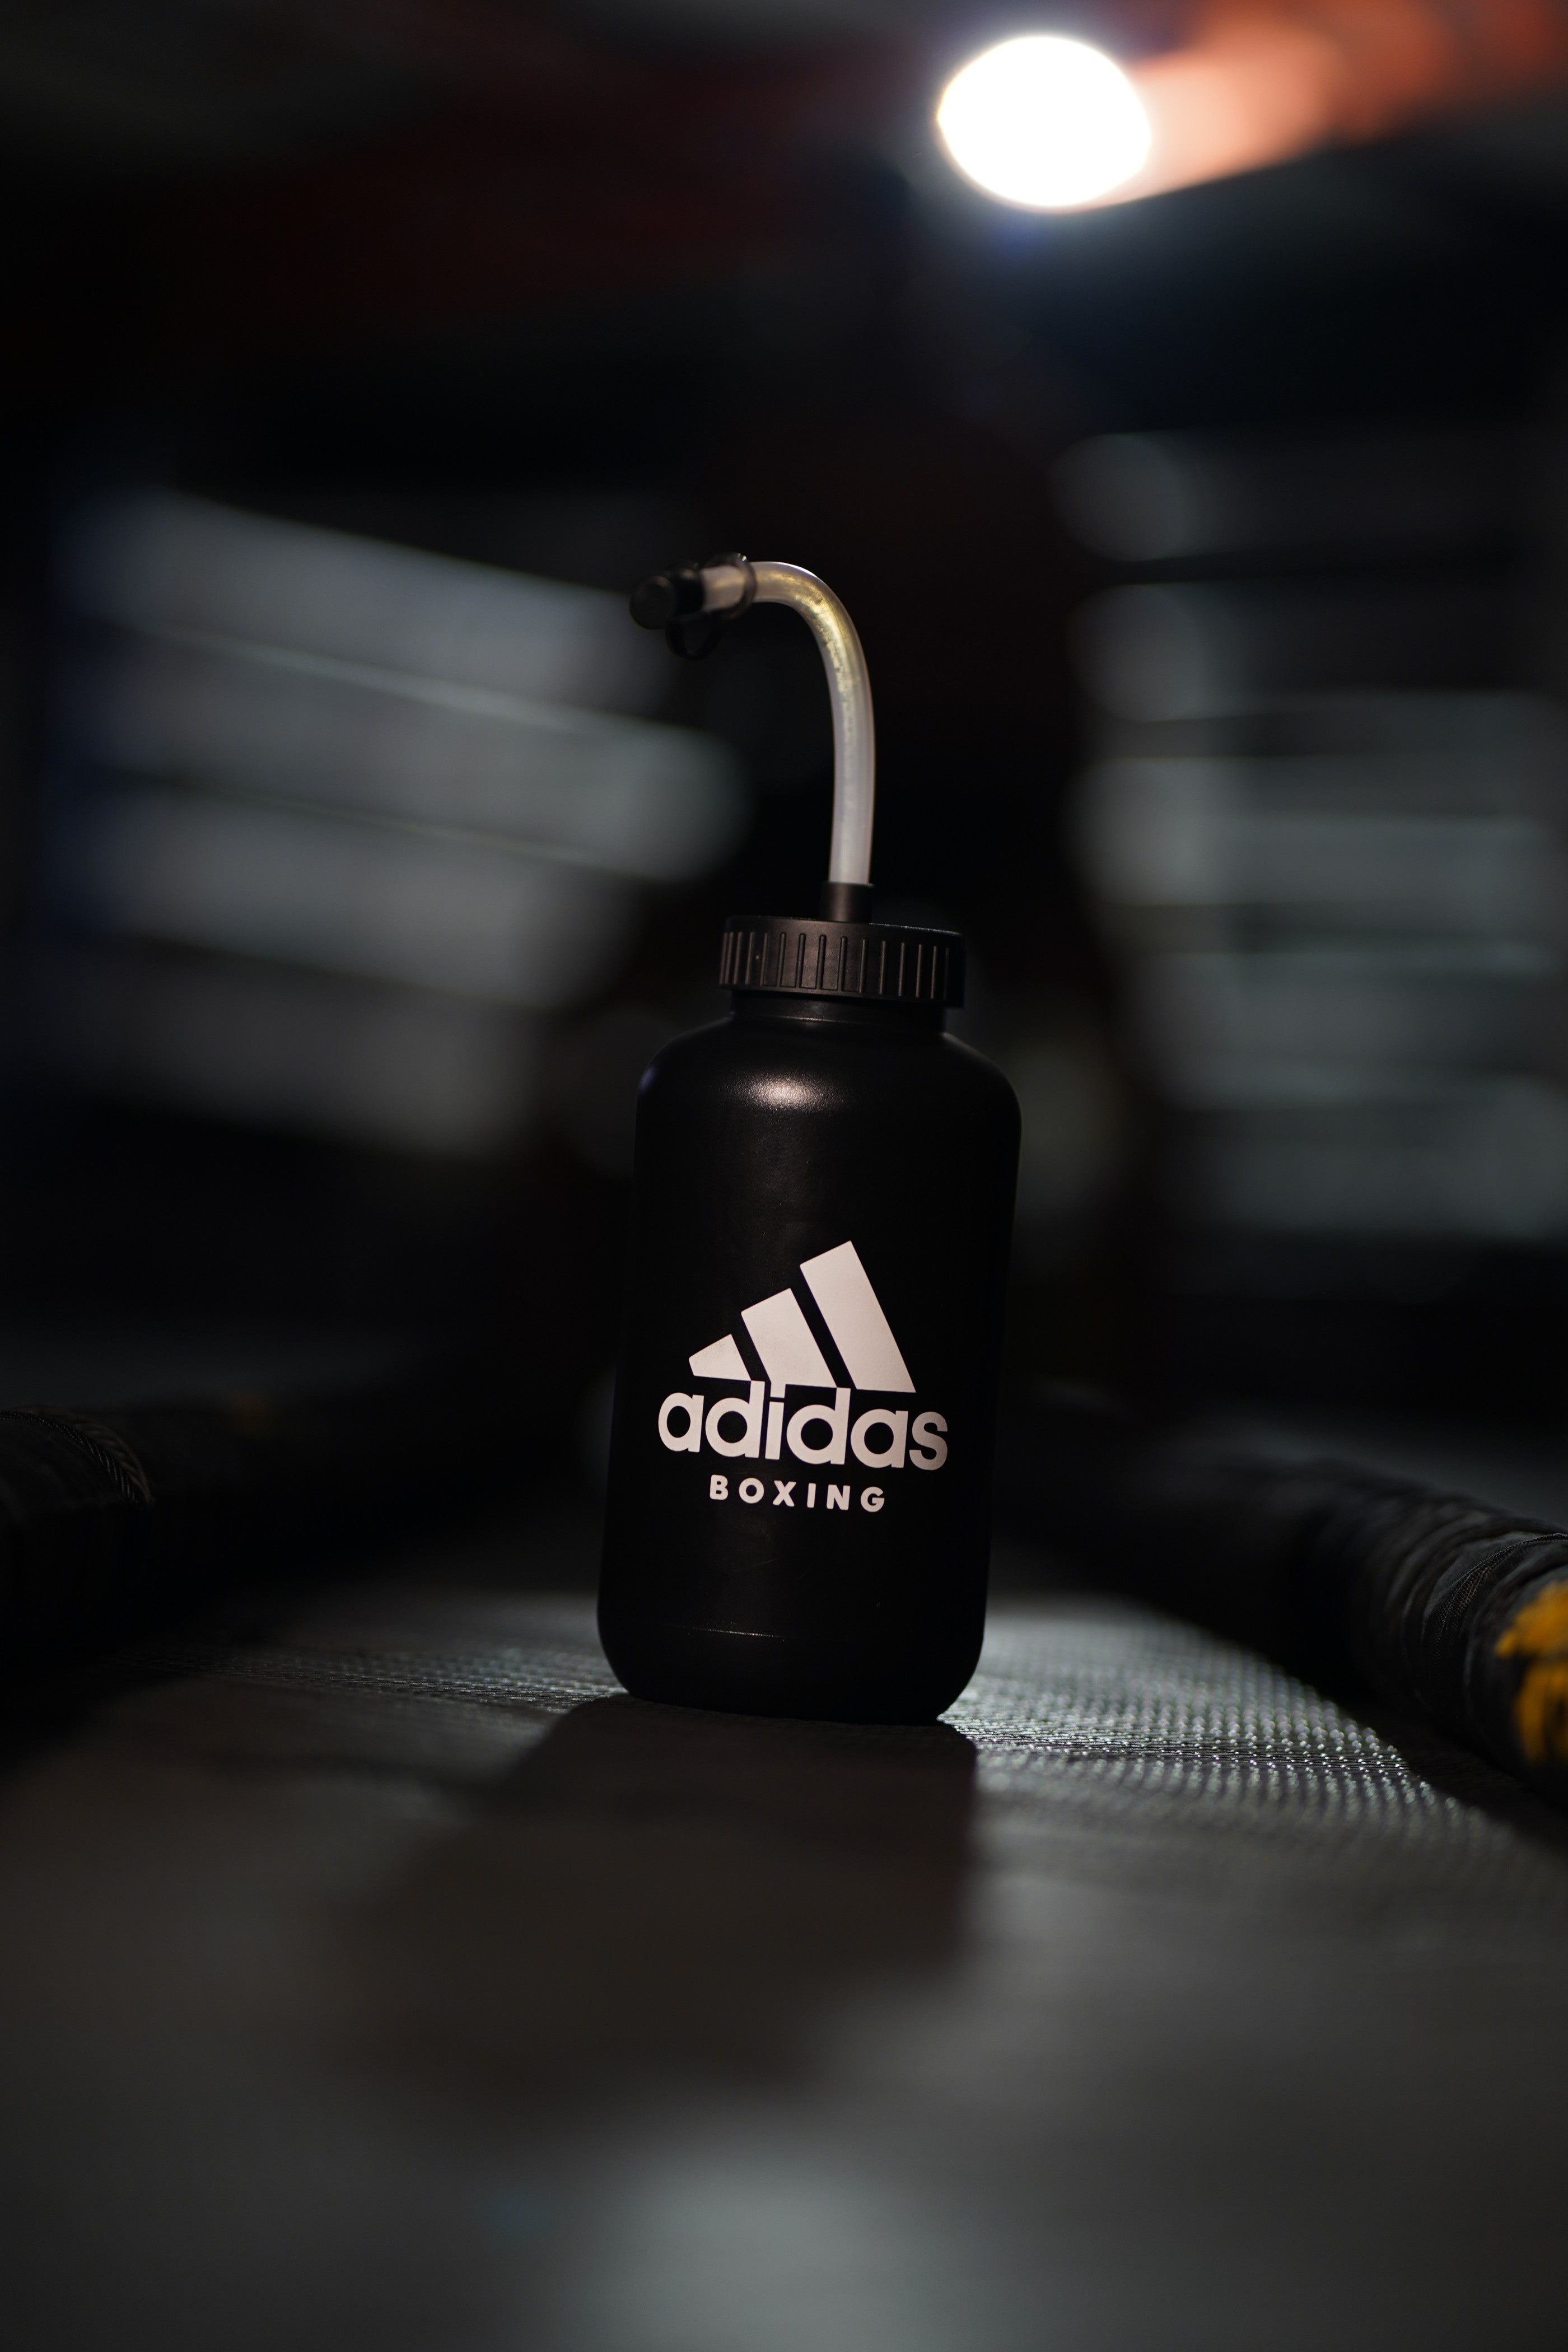 Adidas Black Boxing Water Bottle with Long Straw adiBWB011L, Ideal for Boxing Lacrosse Hockey Football Sports and Fitness Gym Hydration - Sports Leak Proof squeeze water jugs with battle rope